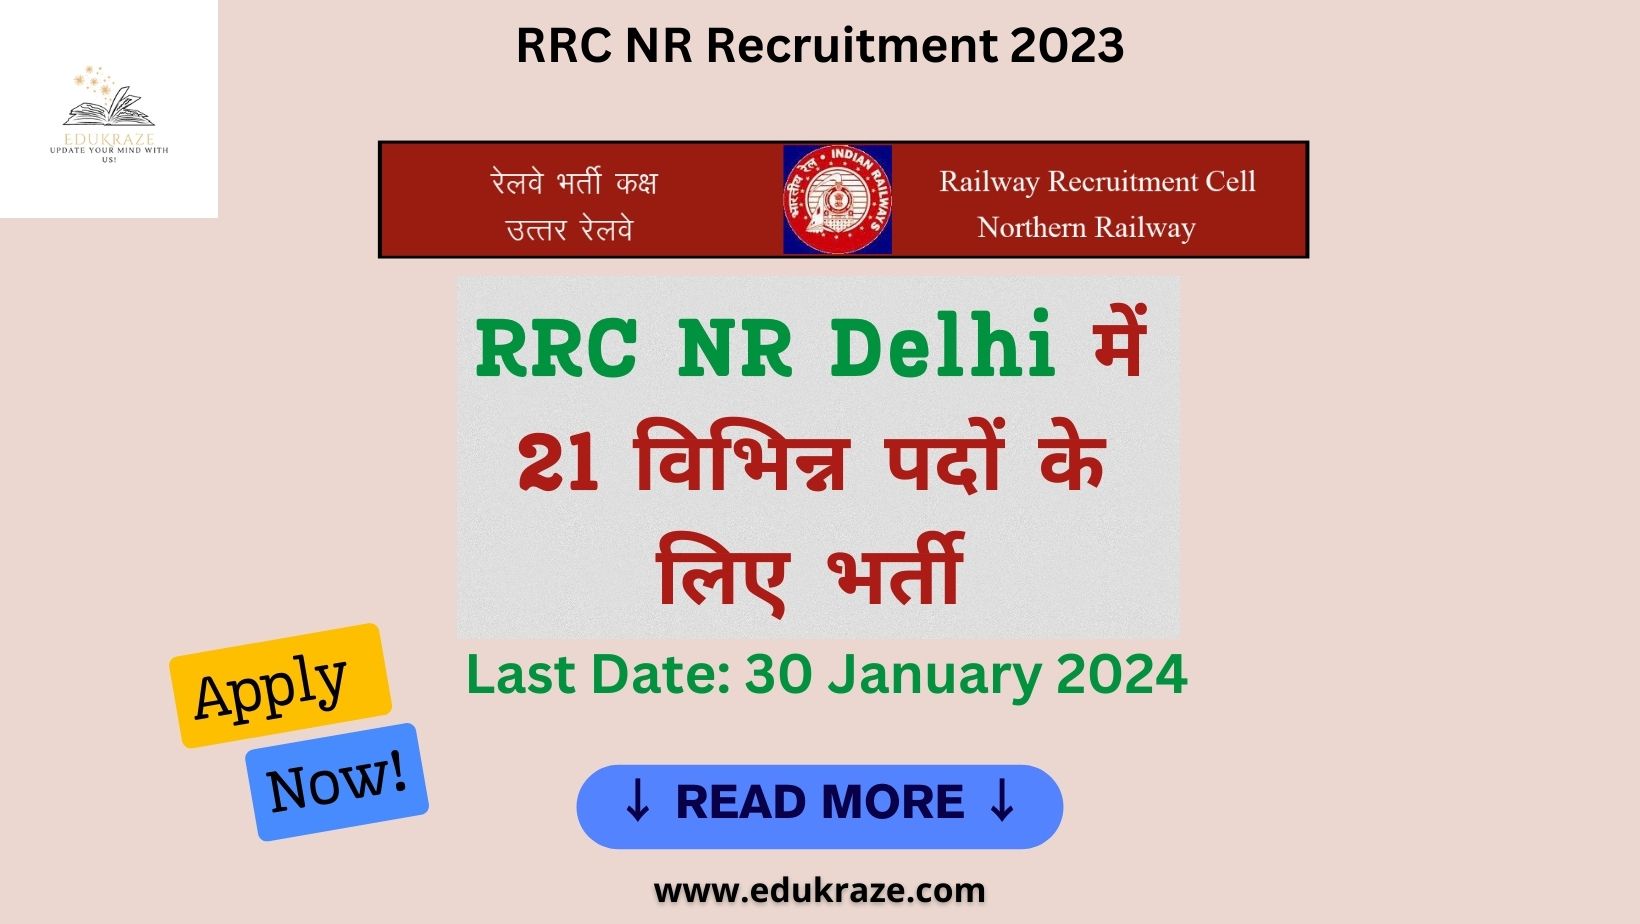 You are currently viewing 21 Railways Recruitment Out at RRC NR